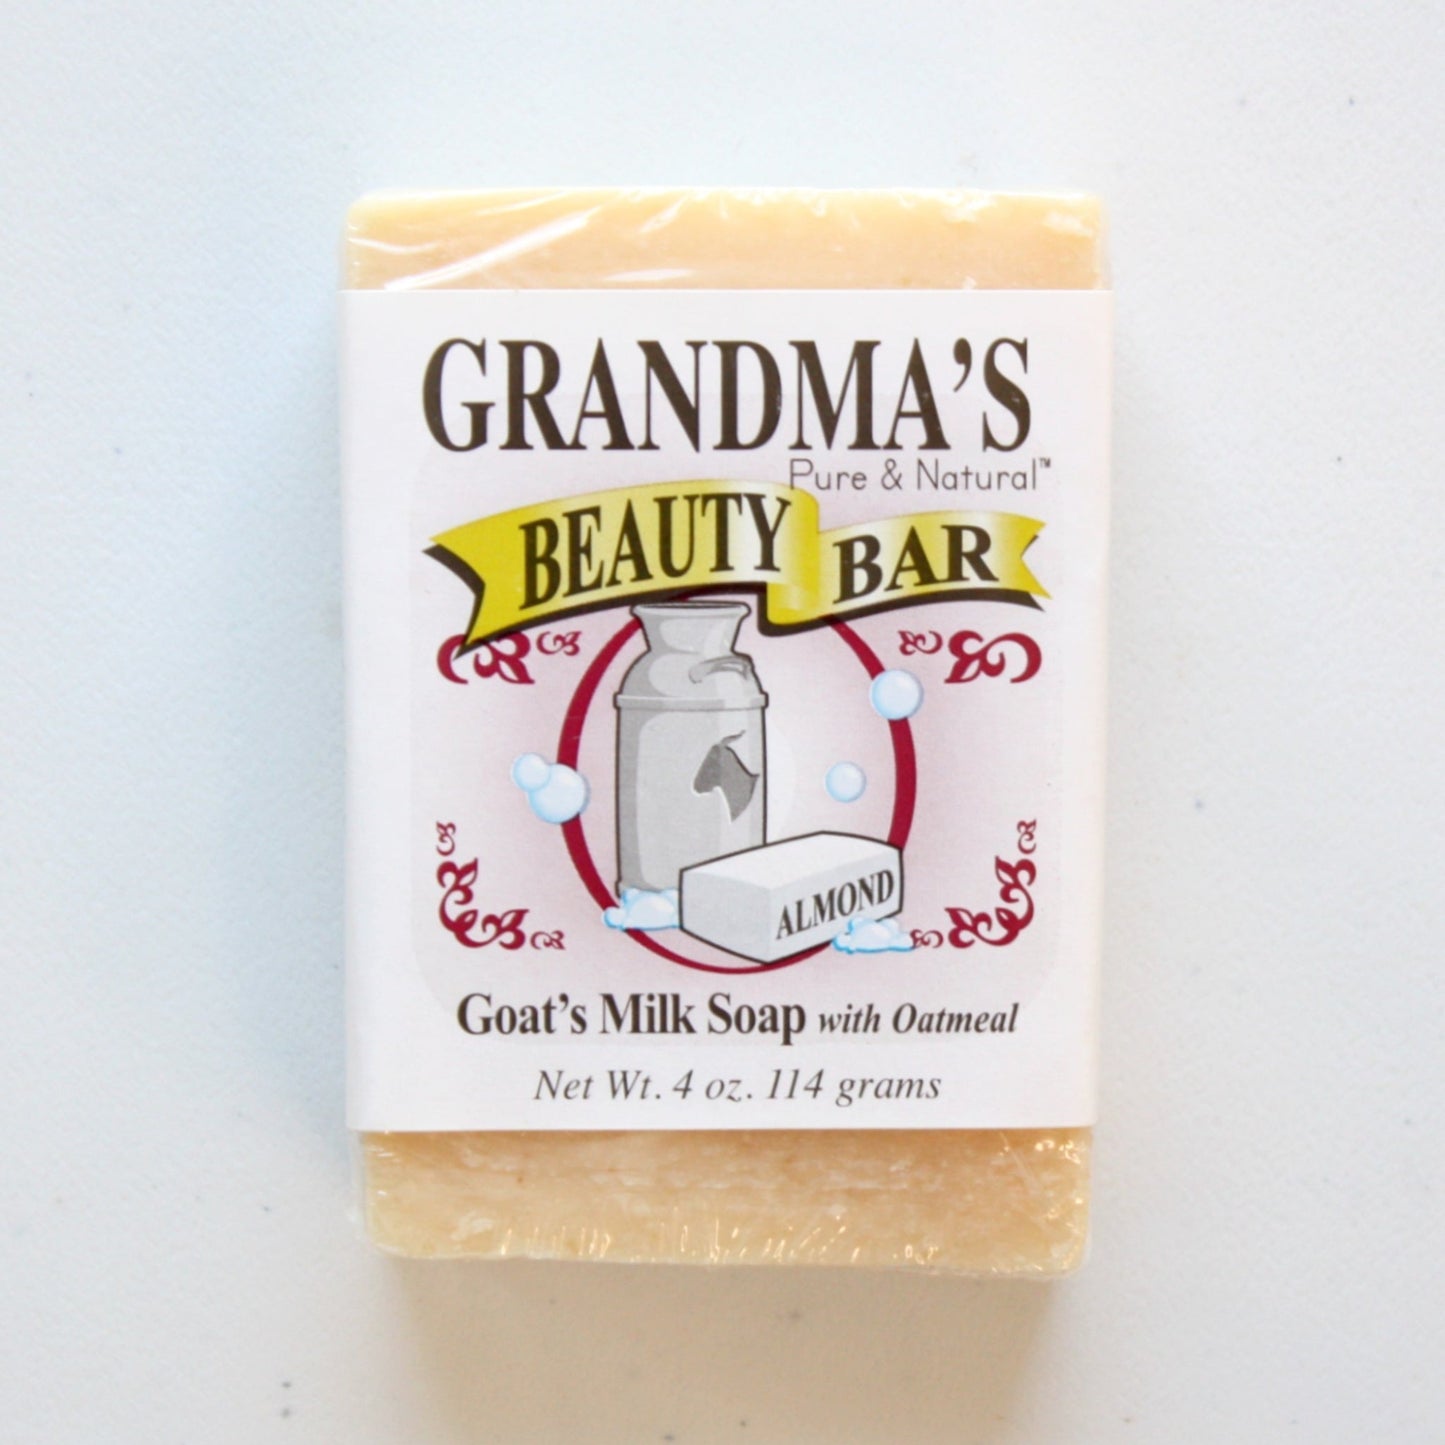 Grandma's Beauty Bars - Goats Milk Soap with Oatmeal - Almond or Lavender - Made in the USA